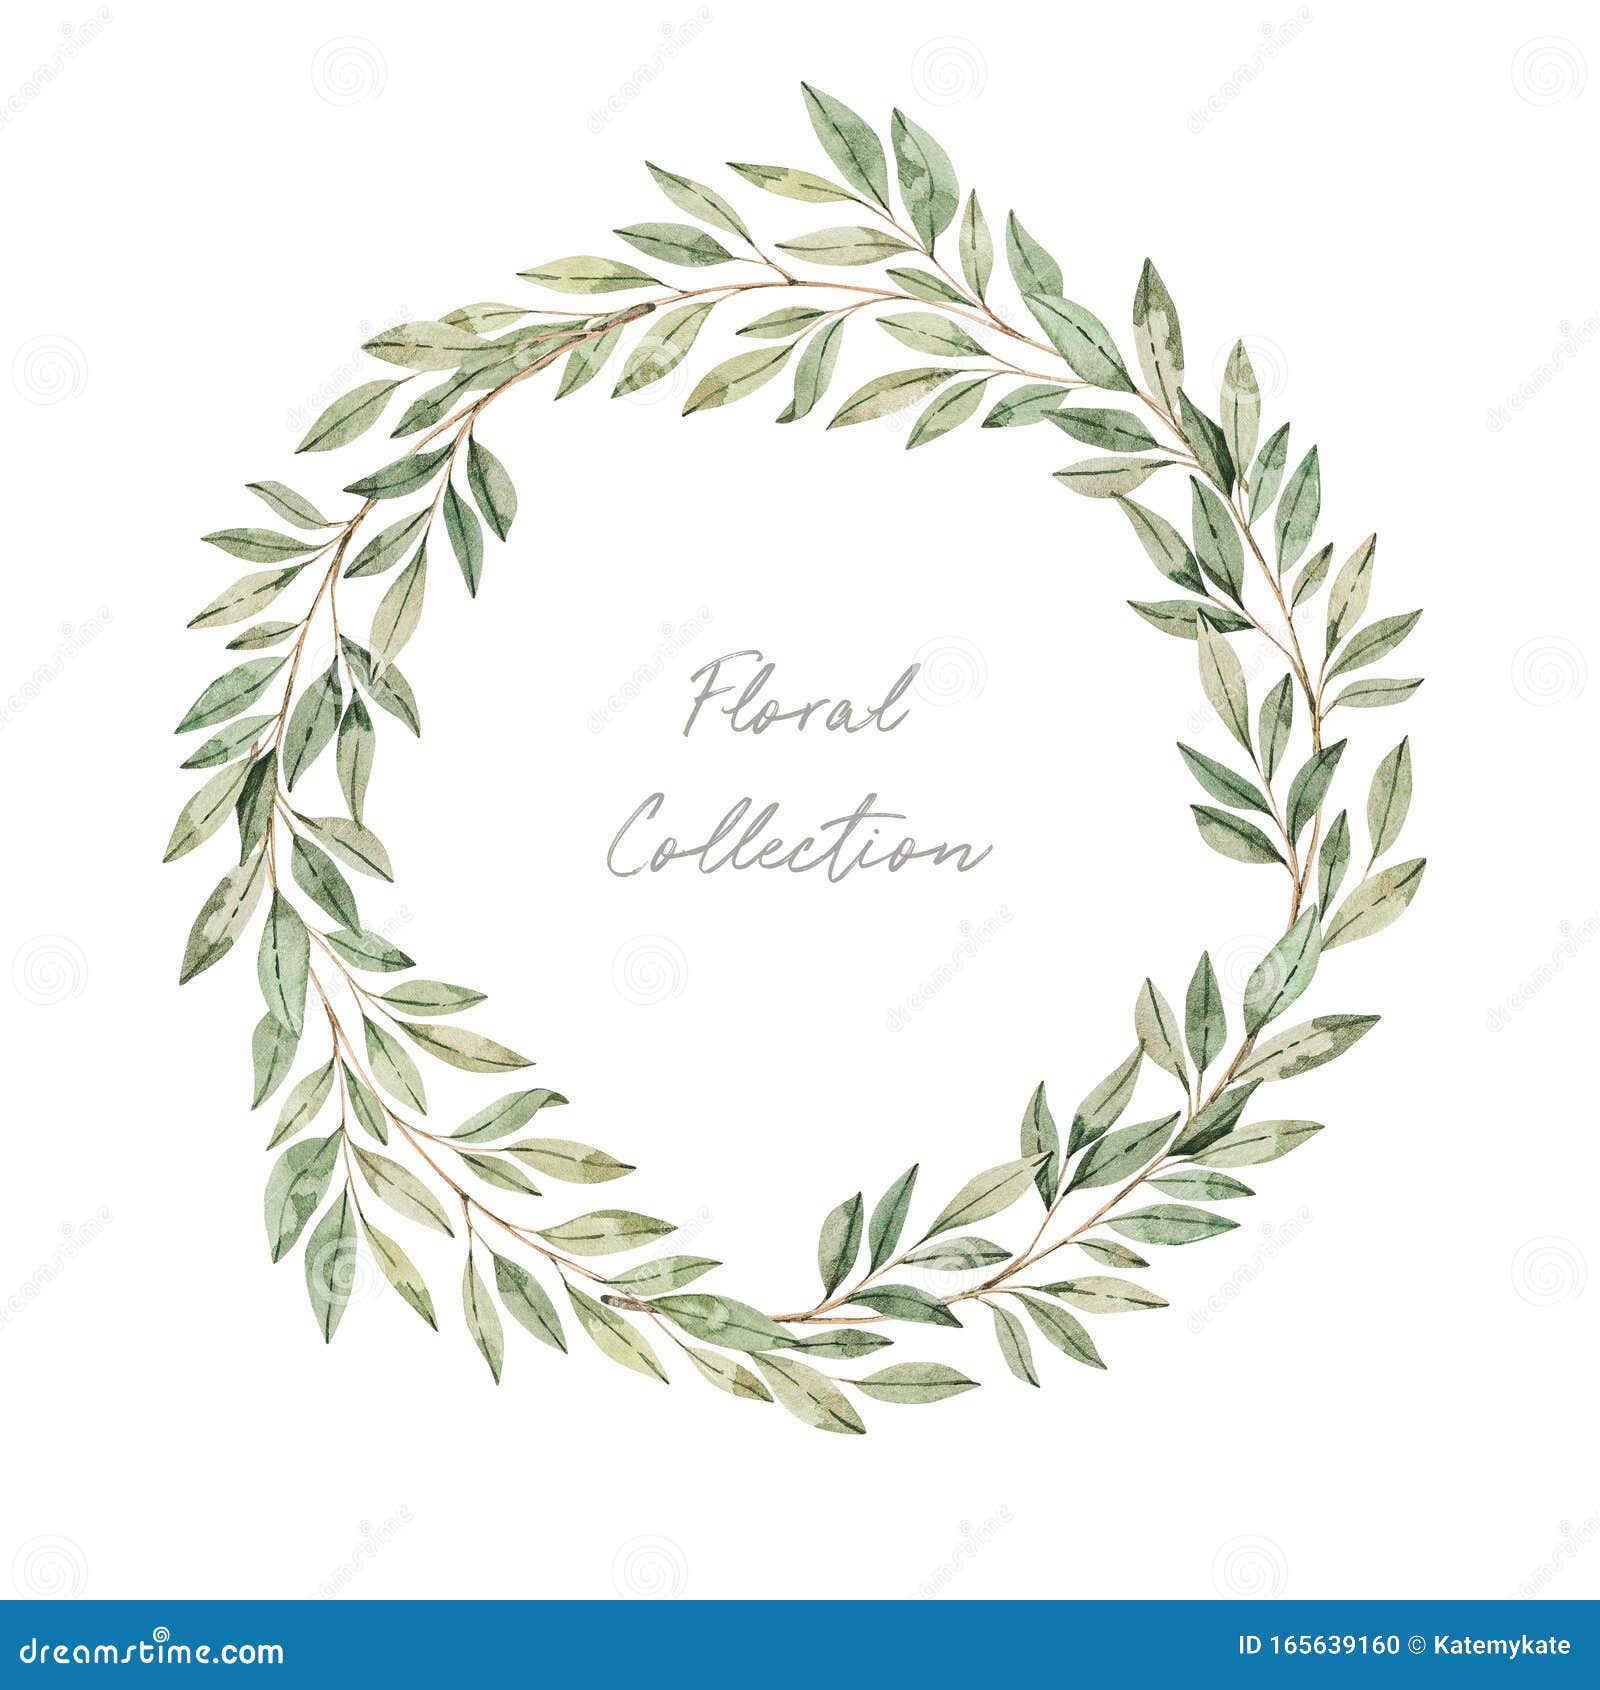 watercolor s. botanical clipart. wreath of green leaves and branches. floral  s. greenery frame. perfect